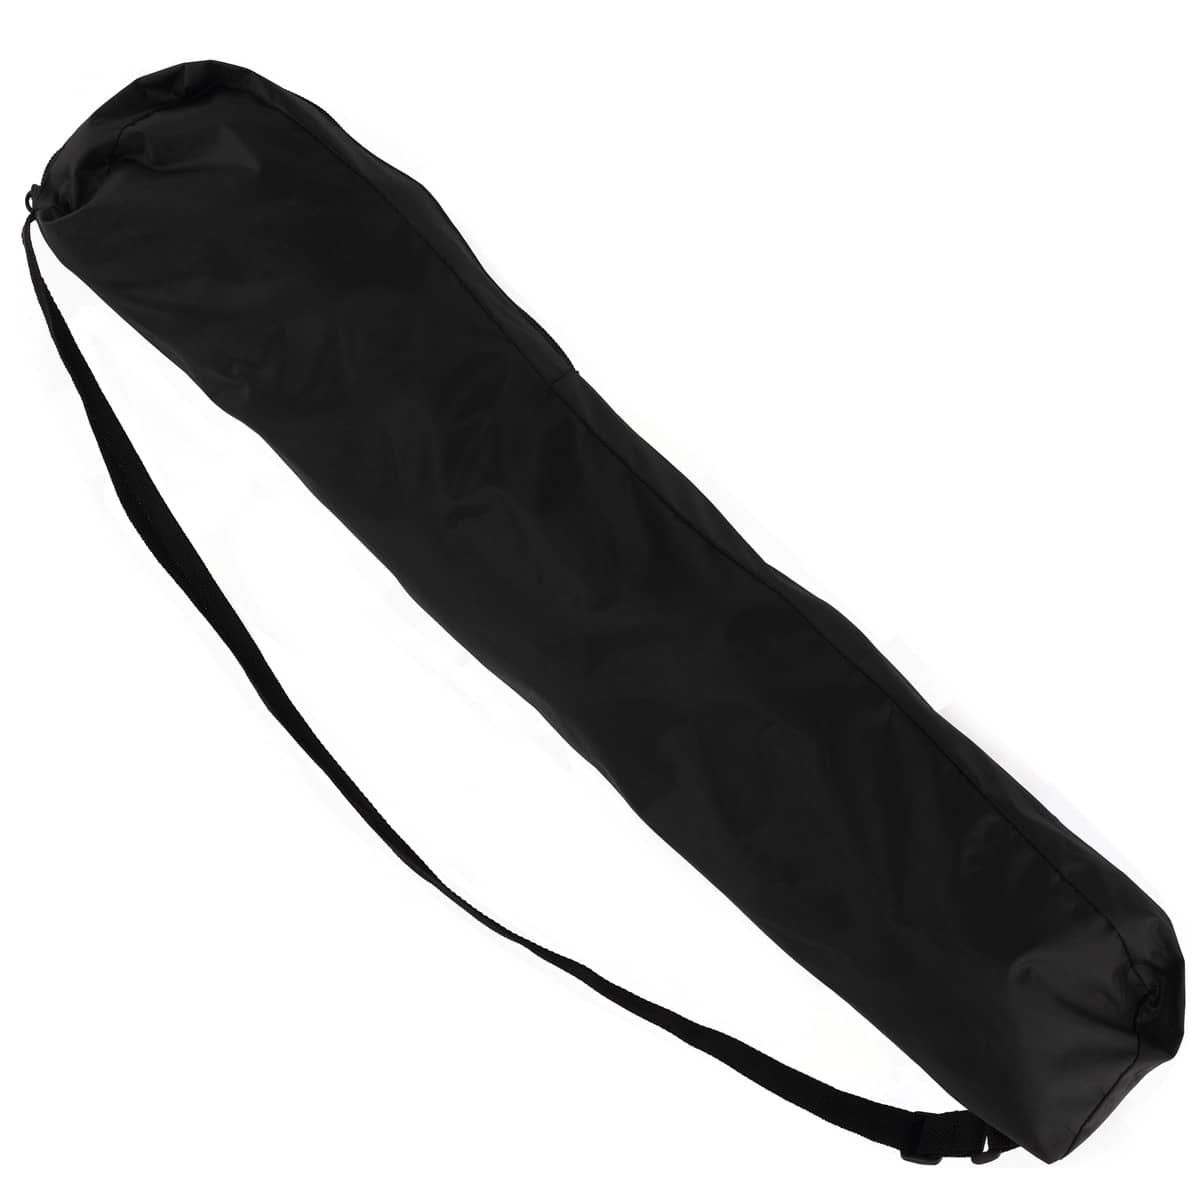 Nylon carrying case with shoulder strap